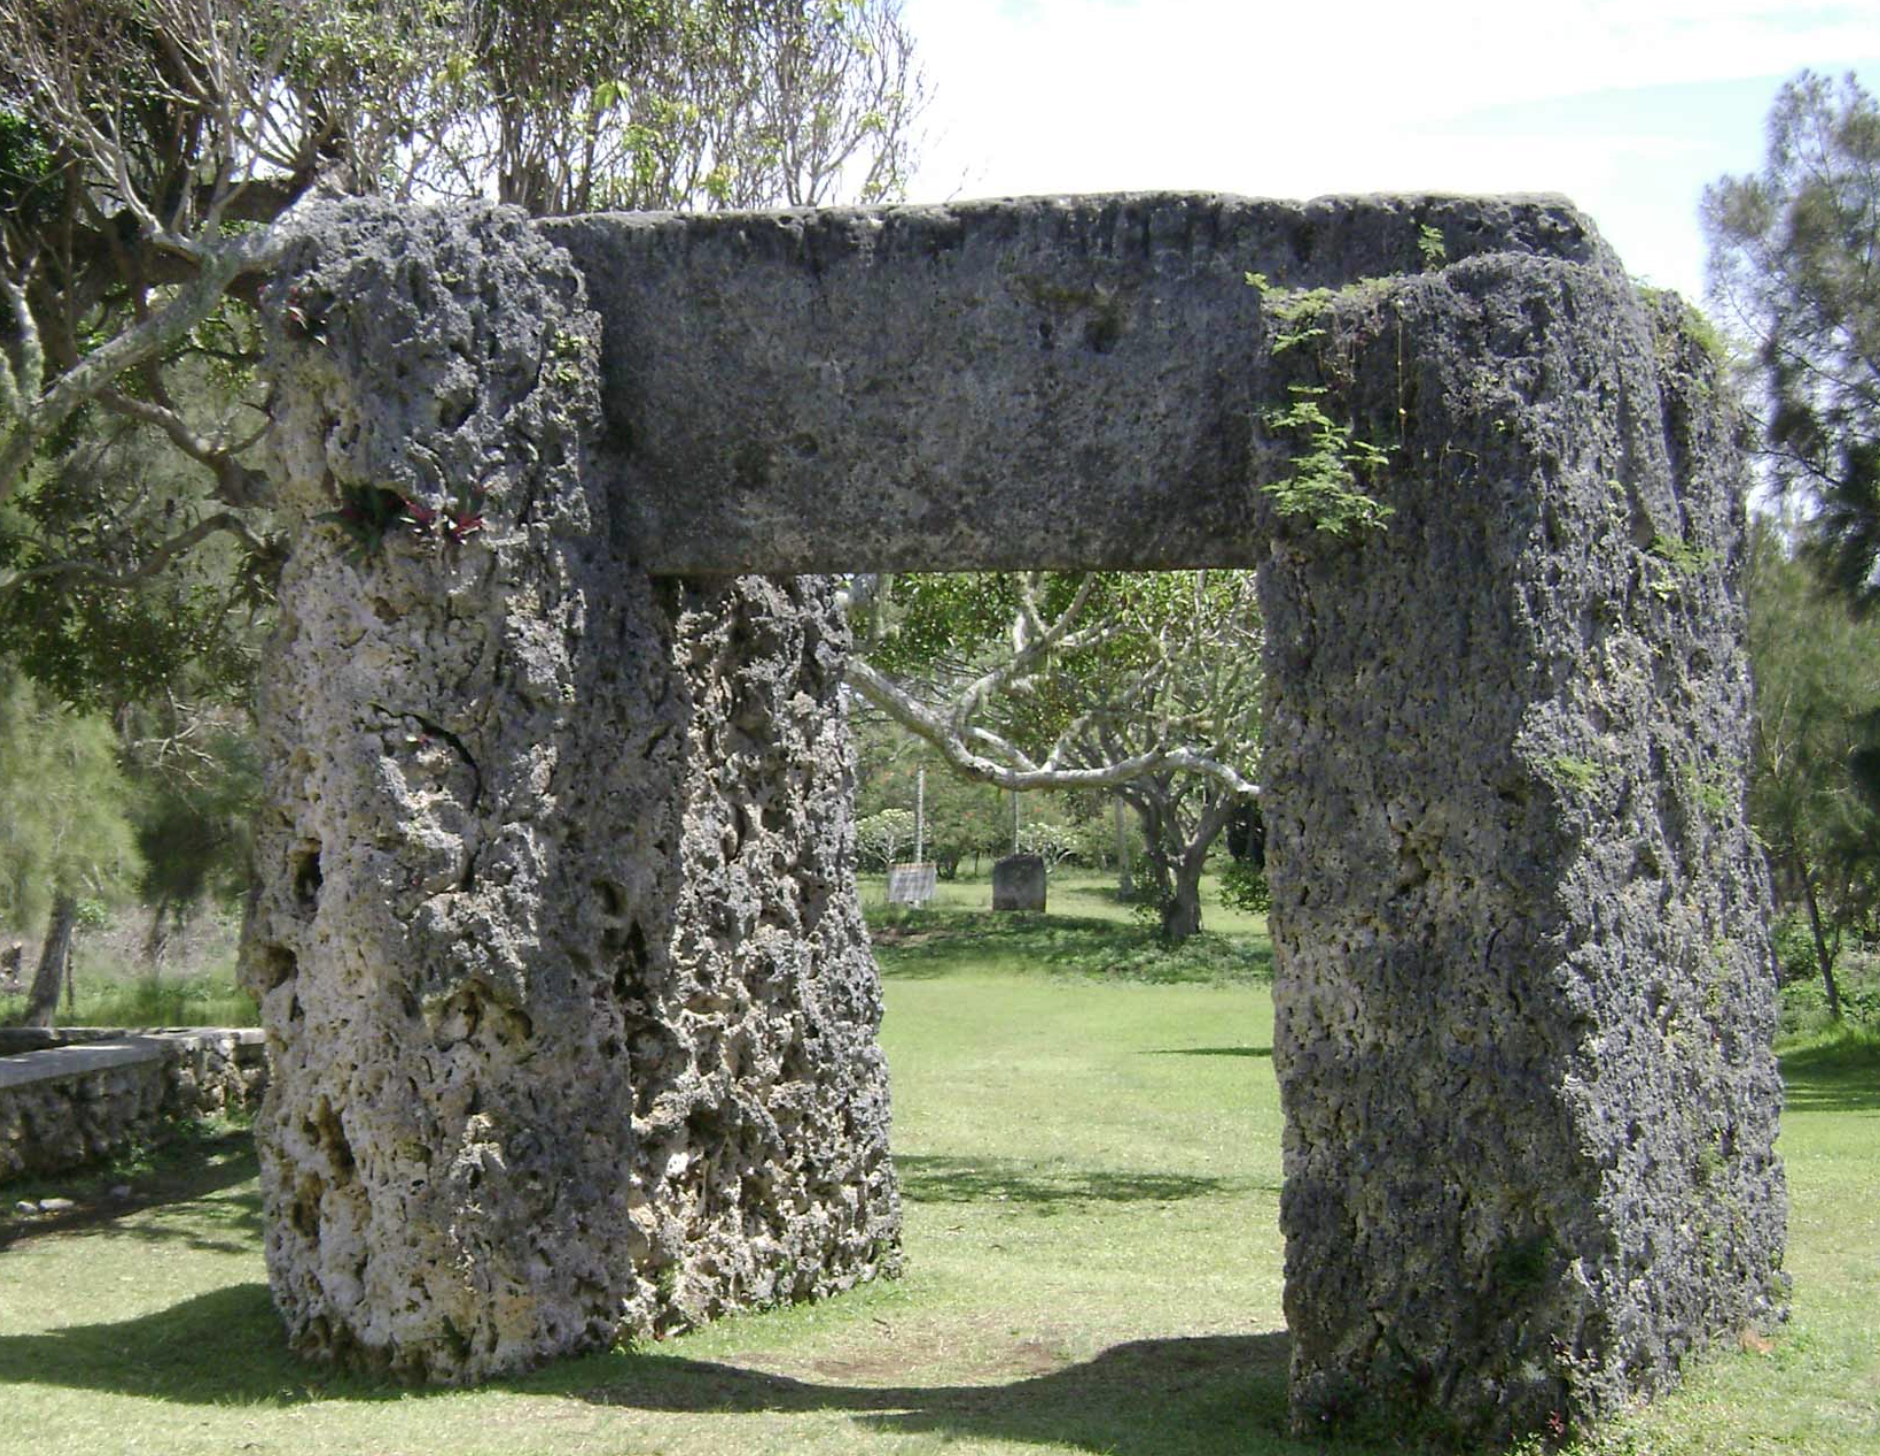 A stone monument with two stones acting as posts and a third stone sitting vertically atop the others. The monument sits on grass and there are trees seen in the background. 